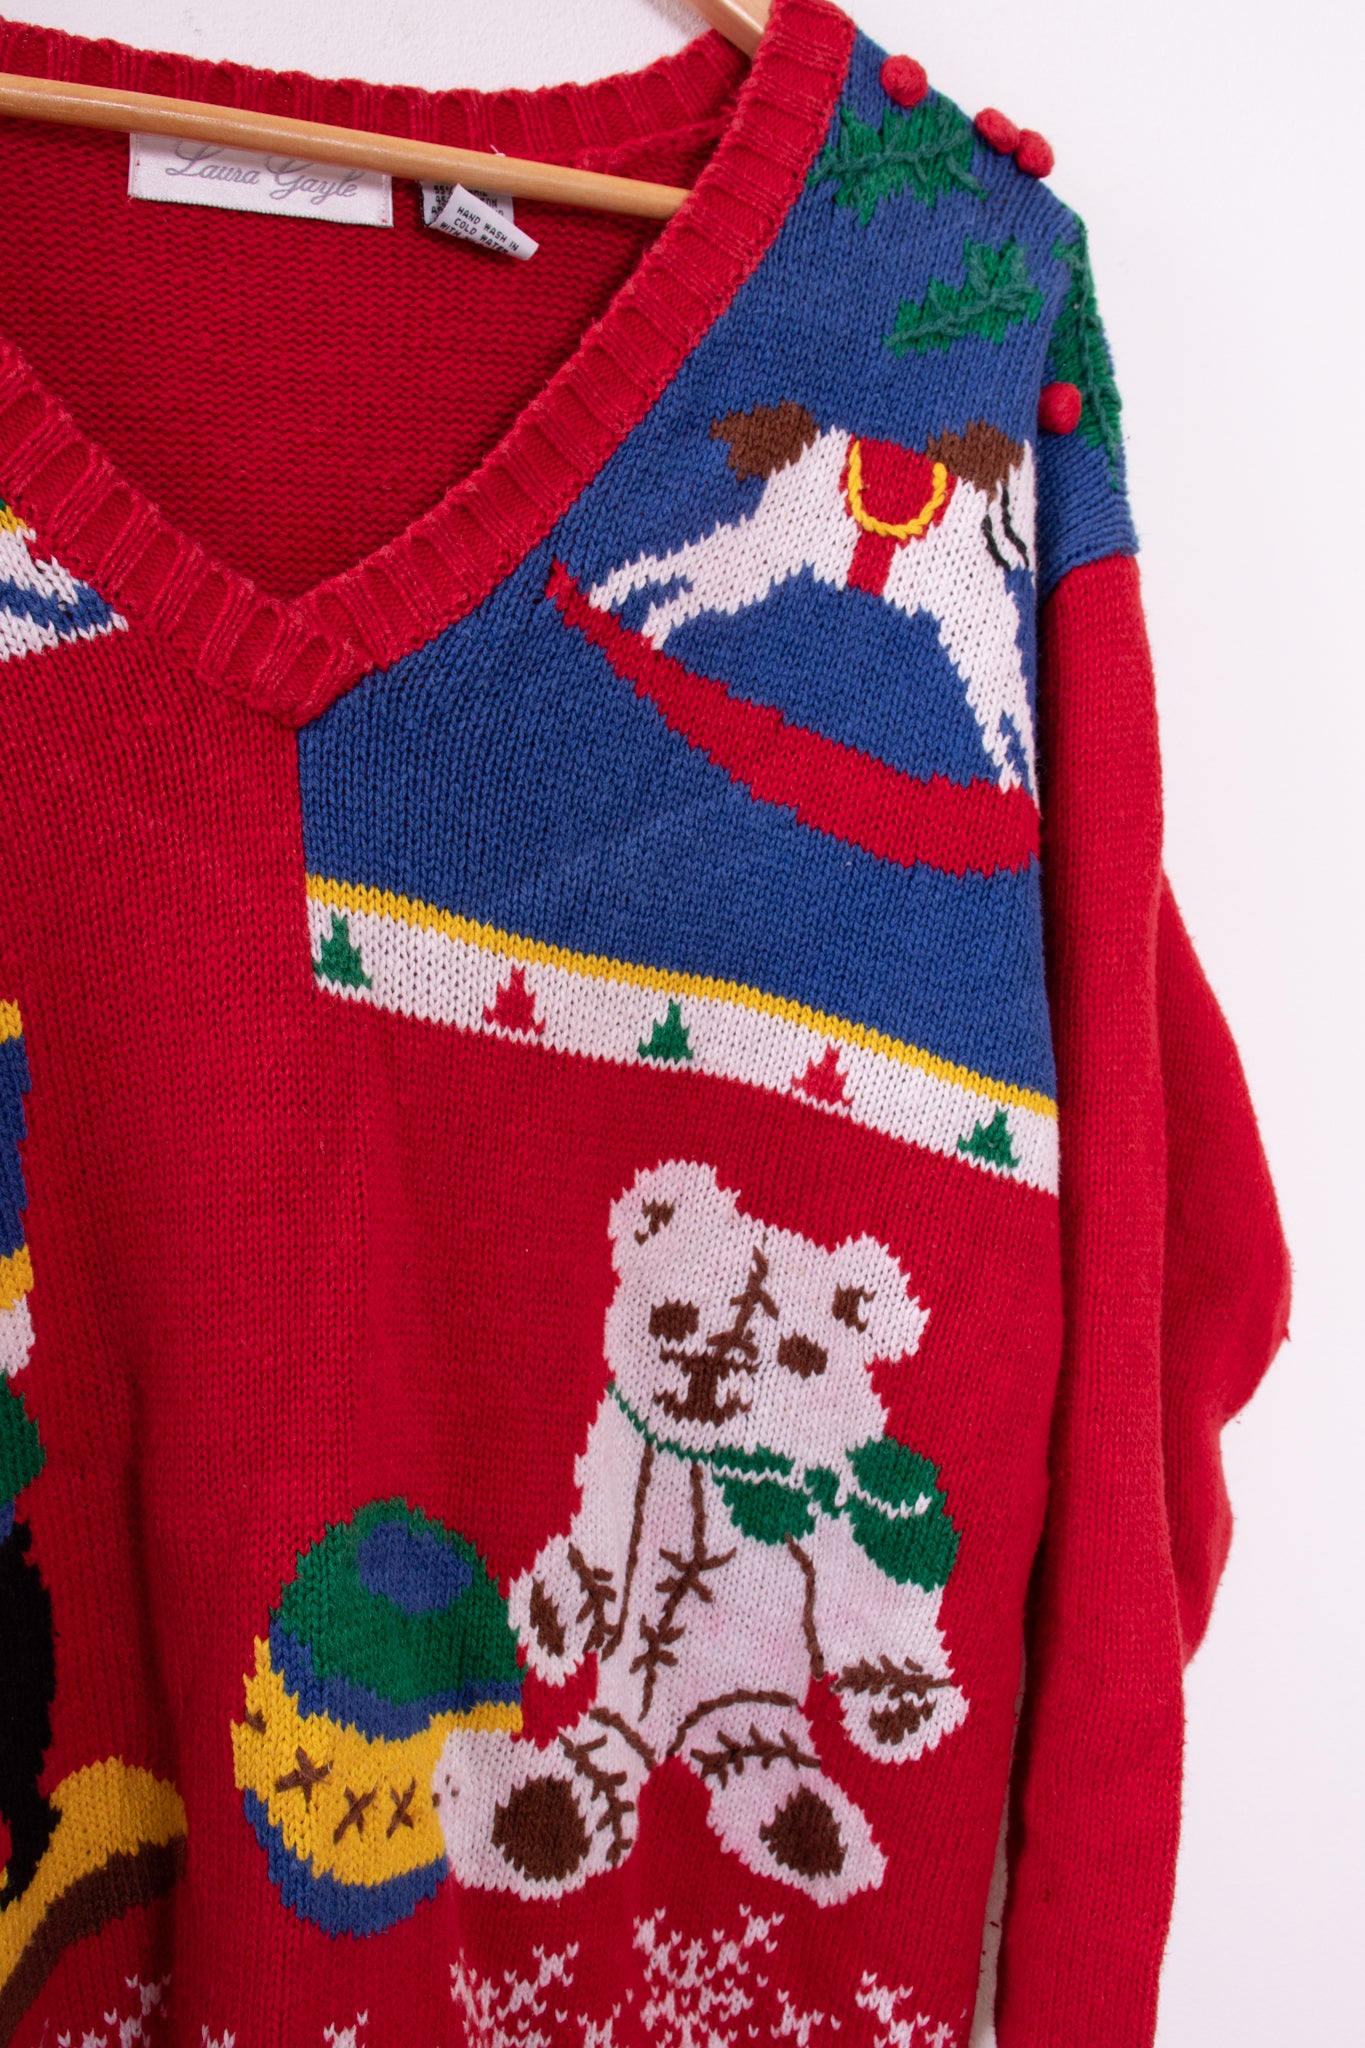 Laura Gayle 90s Funky Christmas Sweater